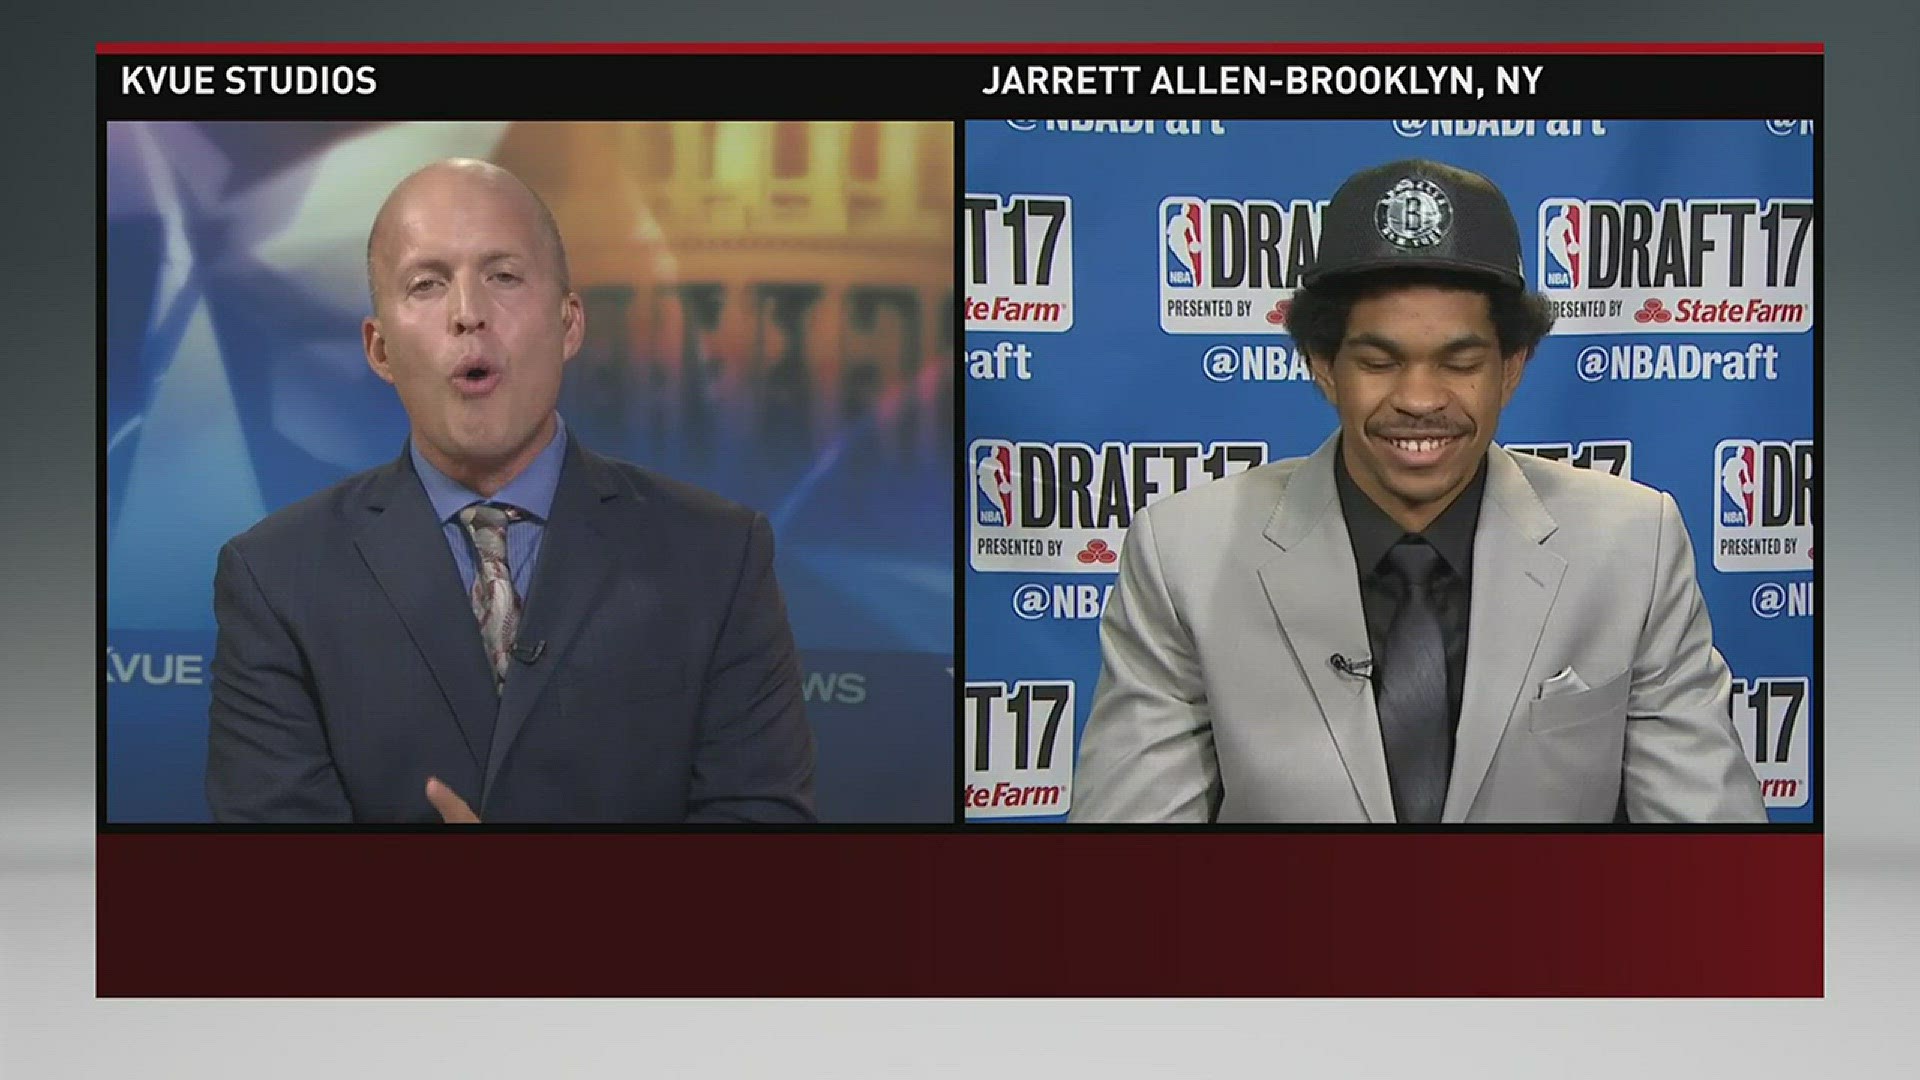 The former Longhorn was dressed to the nines at the NBA Draft, but according to Allen he wasn't the best dressed.